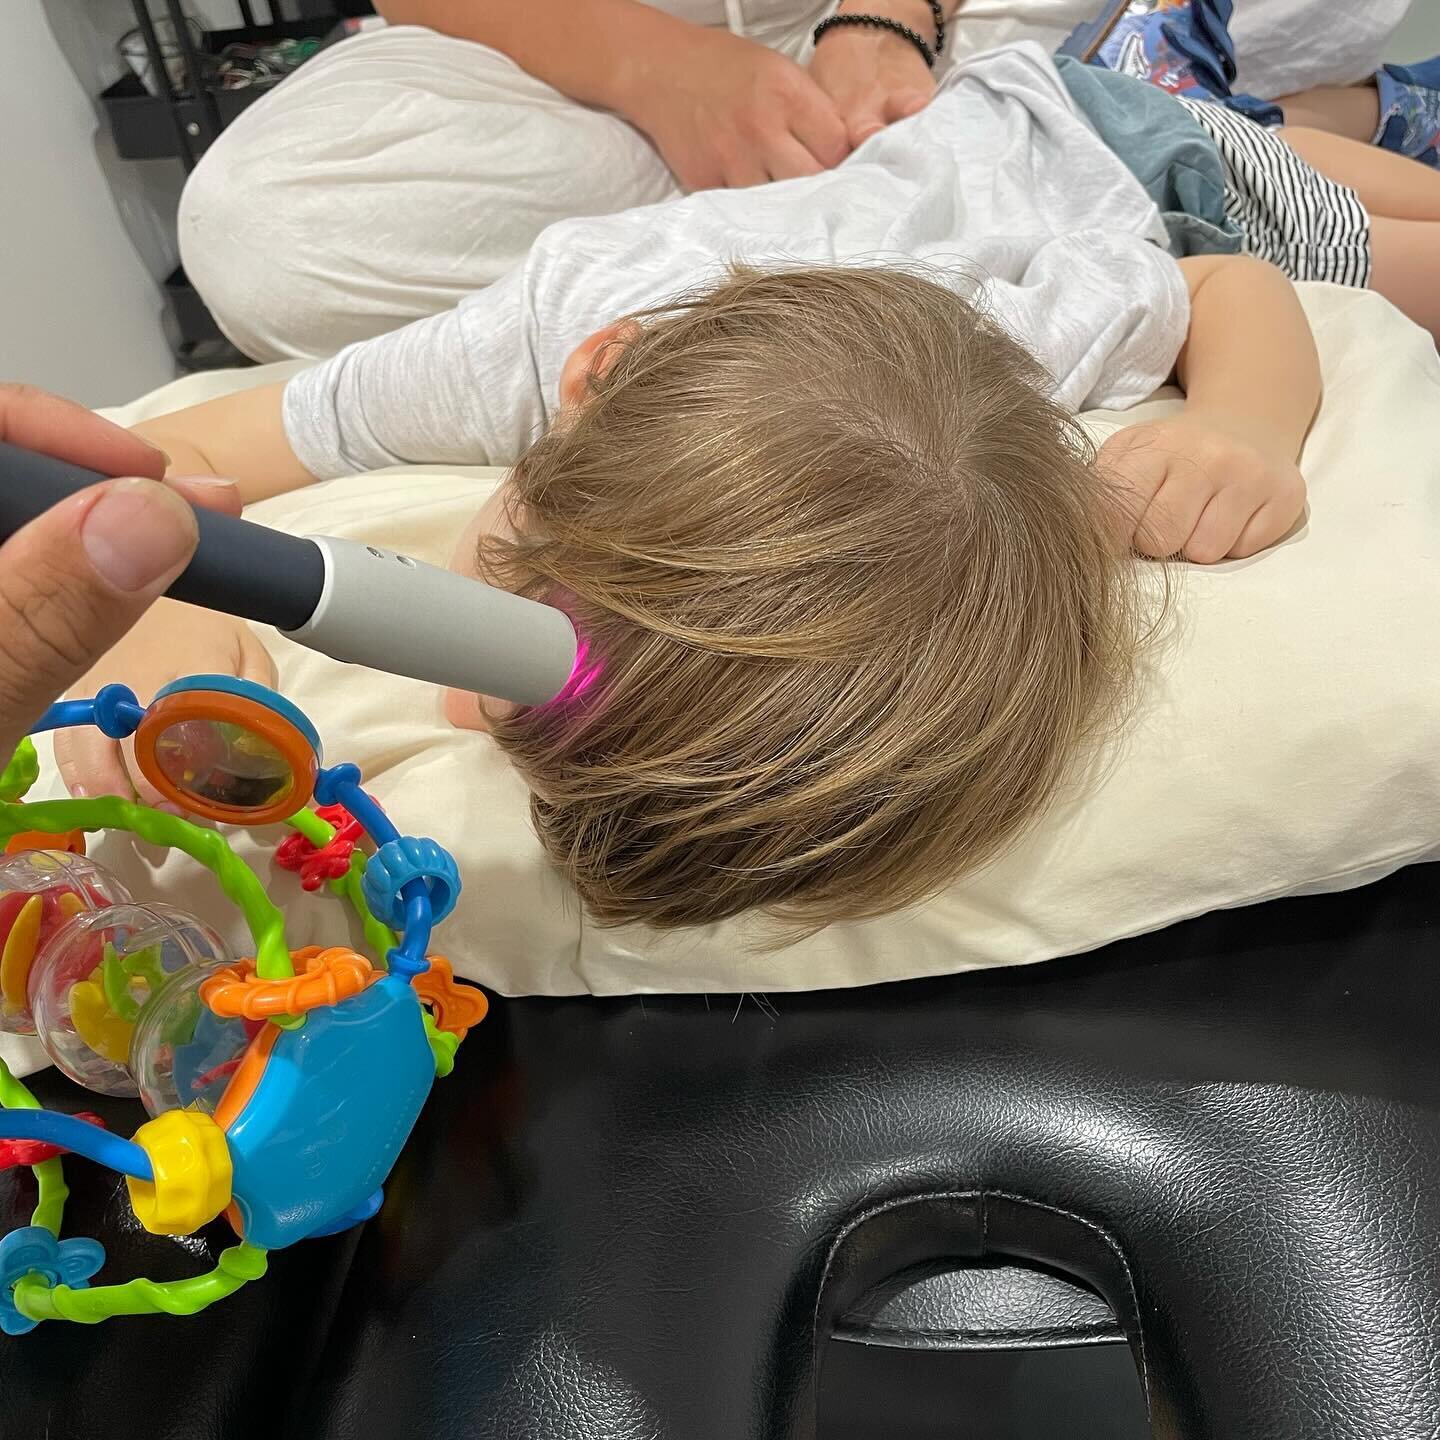 Passed out with his hand on his toy, feeing relaxed and focused. Cauuute #vagusnerve #brainlaser #sleeping #neurological